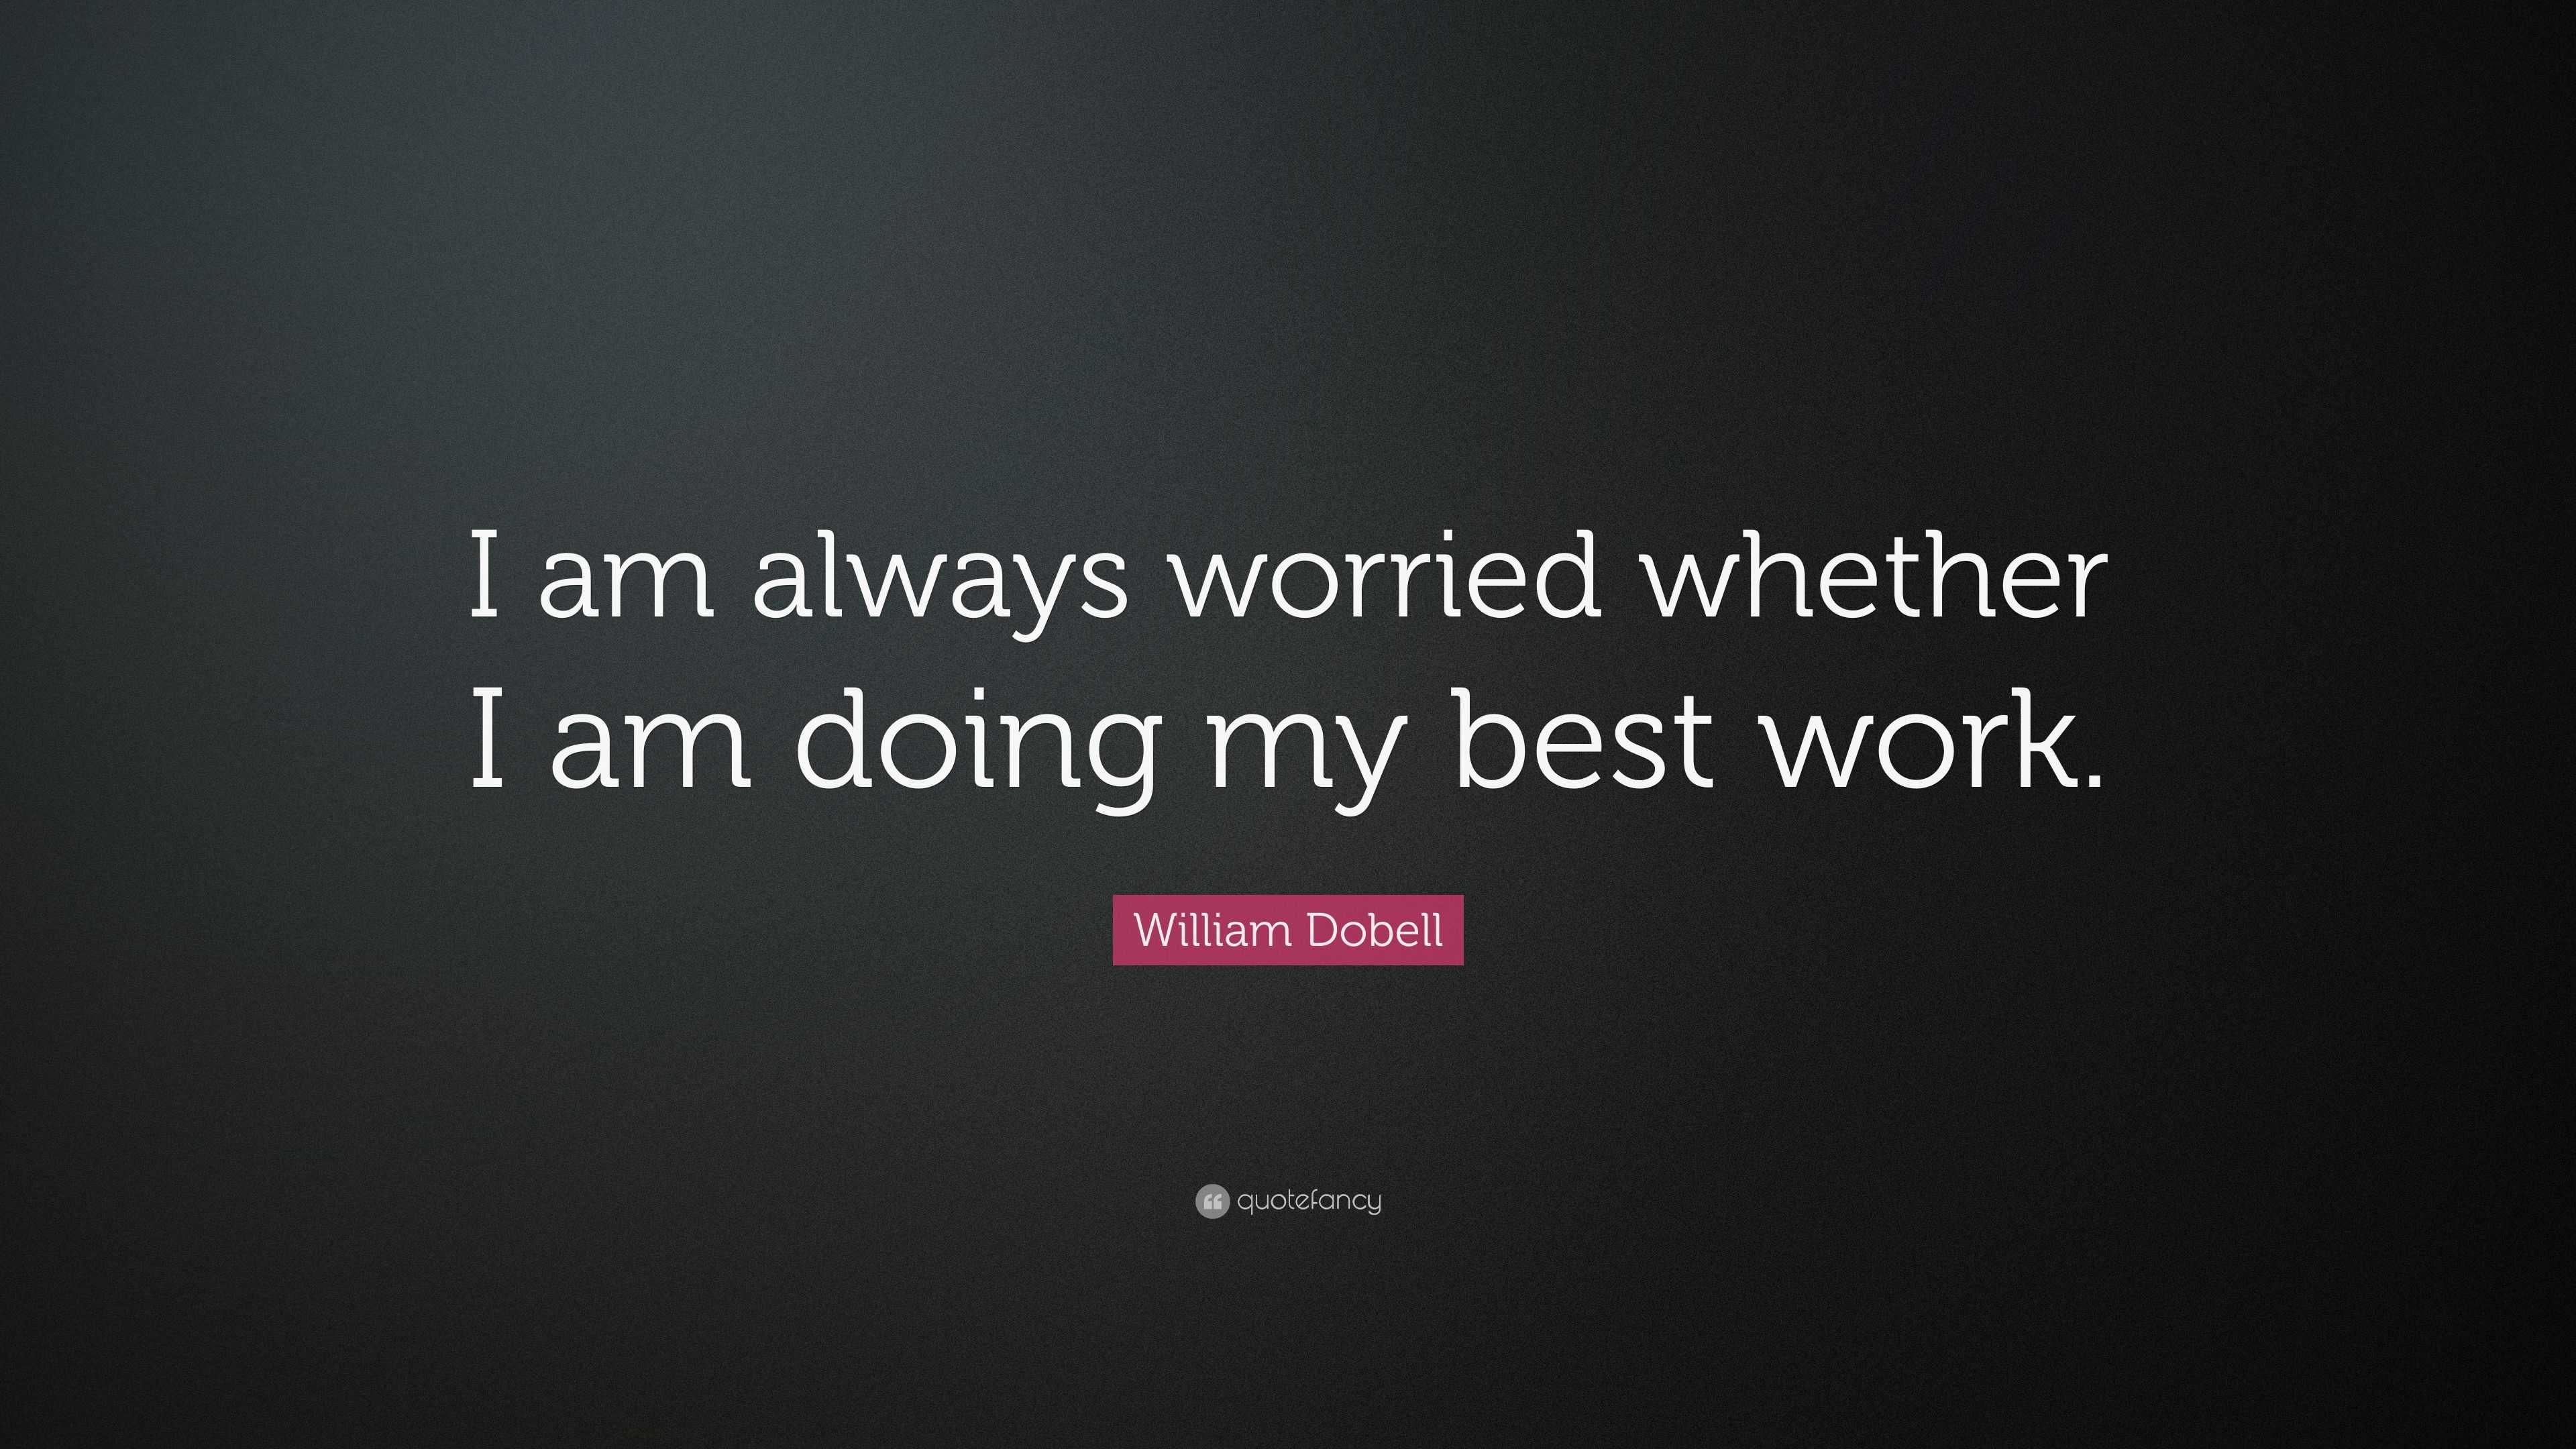 William Dobell Quote: “I am always worried whether I am doing my best ...